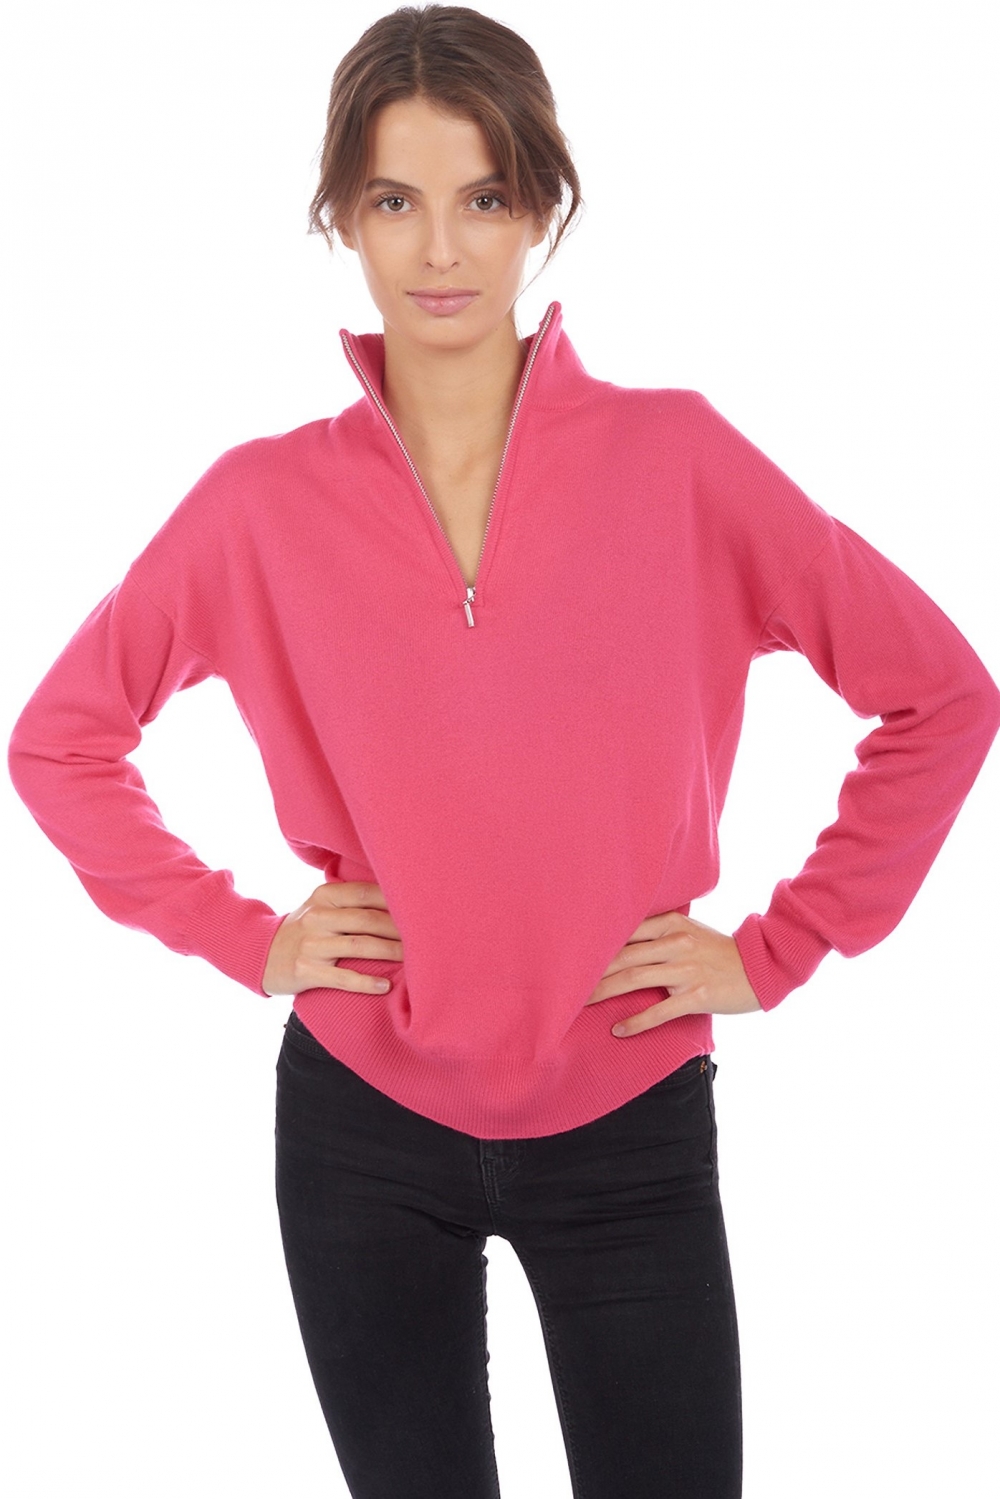 Cachemire pull femme col roule groseille rose shocking 4xl